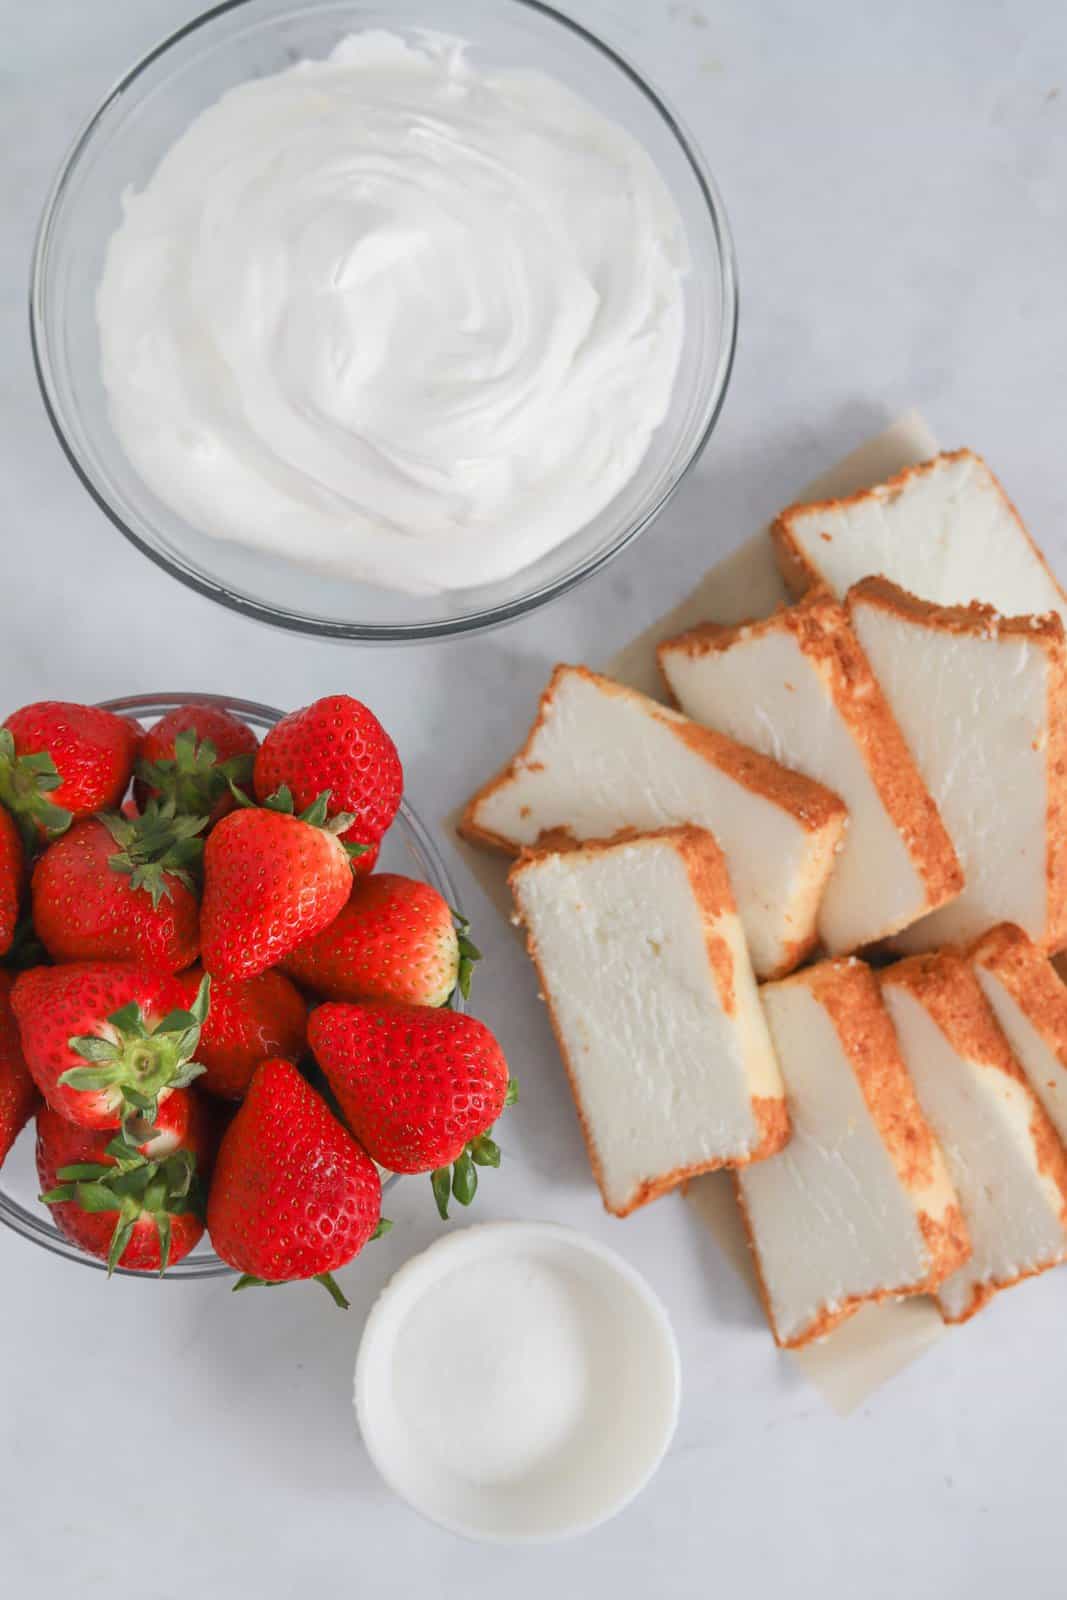 Ingredients needed: strawberries, granulated sugar, whipped cream and angel food cake.